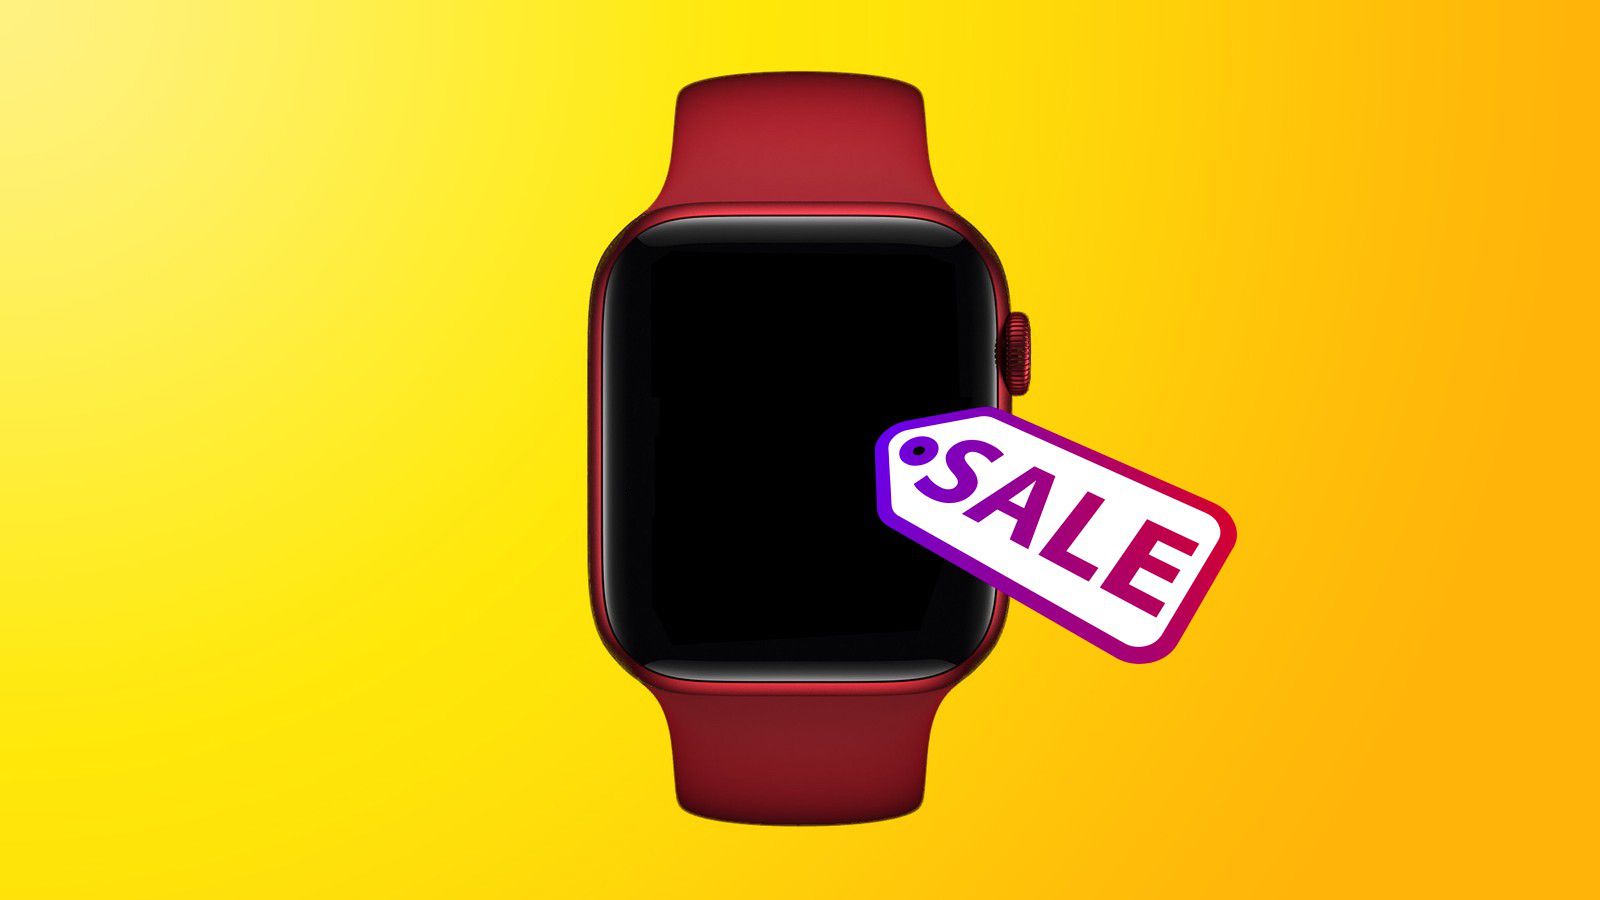 Deals: Grab the Apple Watch Series 6 in (Product)RED for $70 Off